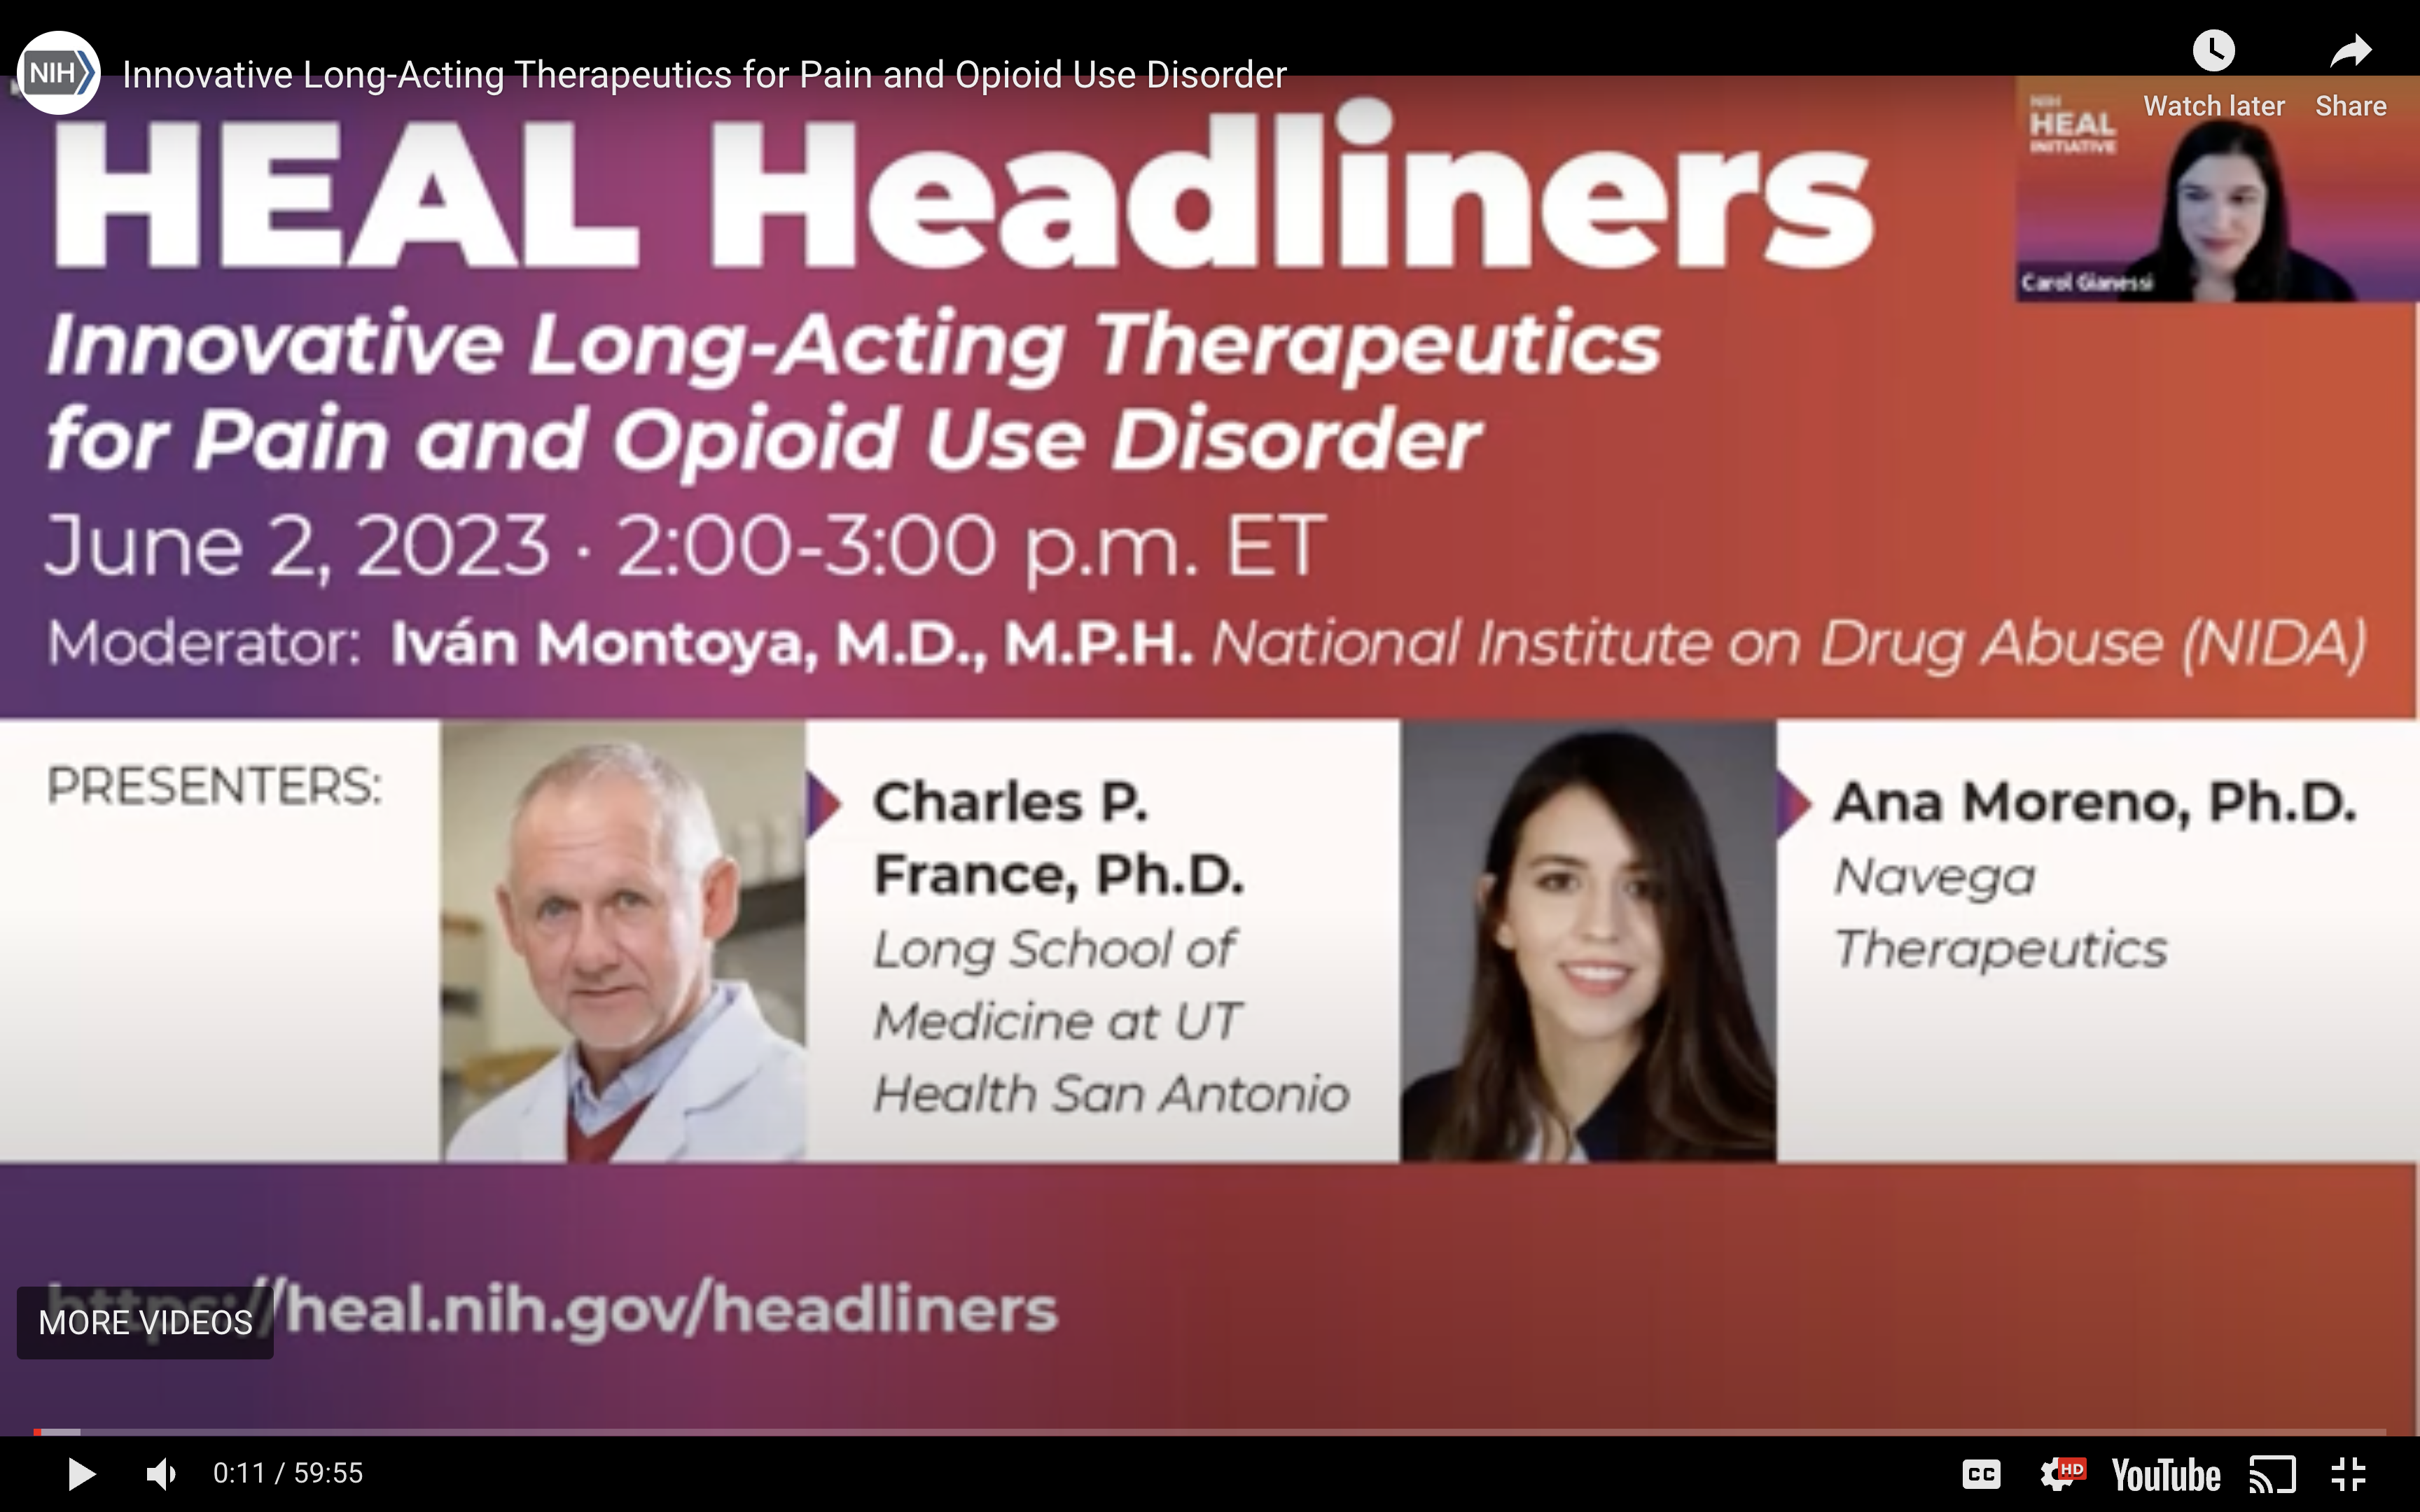 HEAL Headliners: Innovative Long-Acting Therapeutics for Pain and Opioid Use Disorder Recording Available